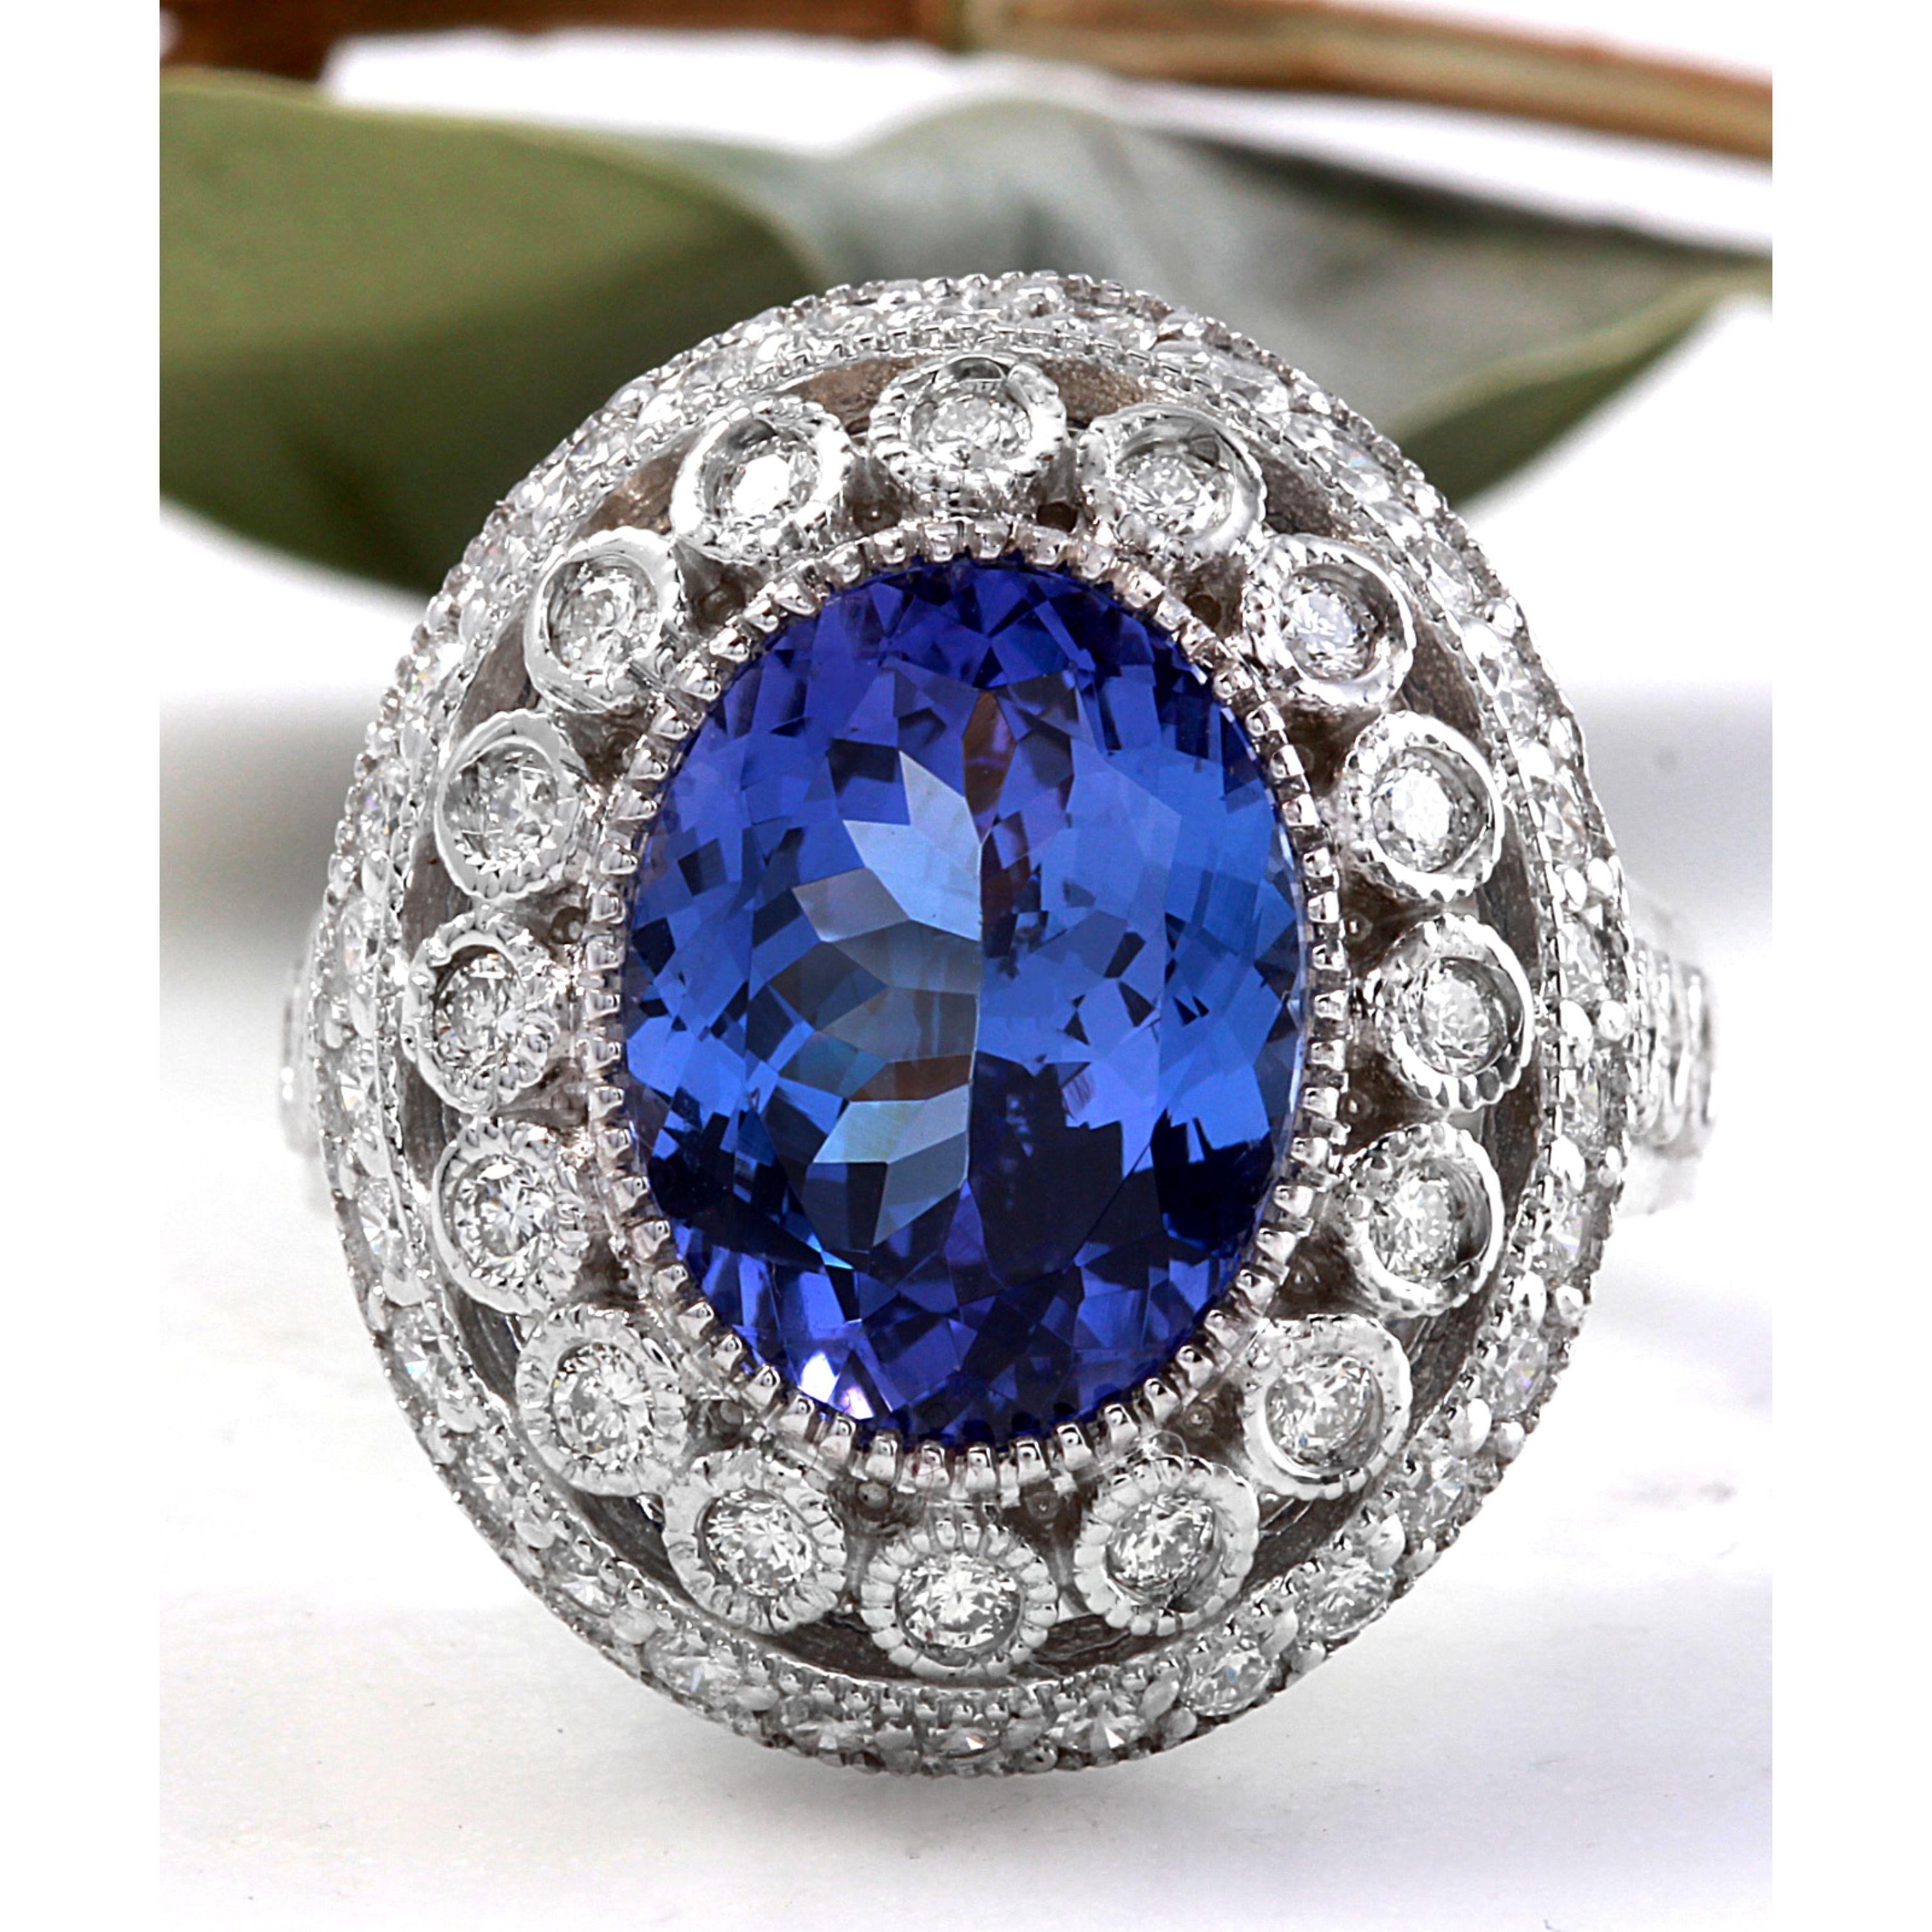 7.50 Carats Natural Very Nice Looking Tanzanite and Diamond 14K Solid White Gold Ring

Total Natural Oval Cut Tanzanite Weight is: Approx. 6.00 Carats

Tanzanite Measures: Approx. 11.00 x 9.00mm

Tanzanite Treatment: Heat

Natural Round Diamonds